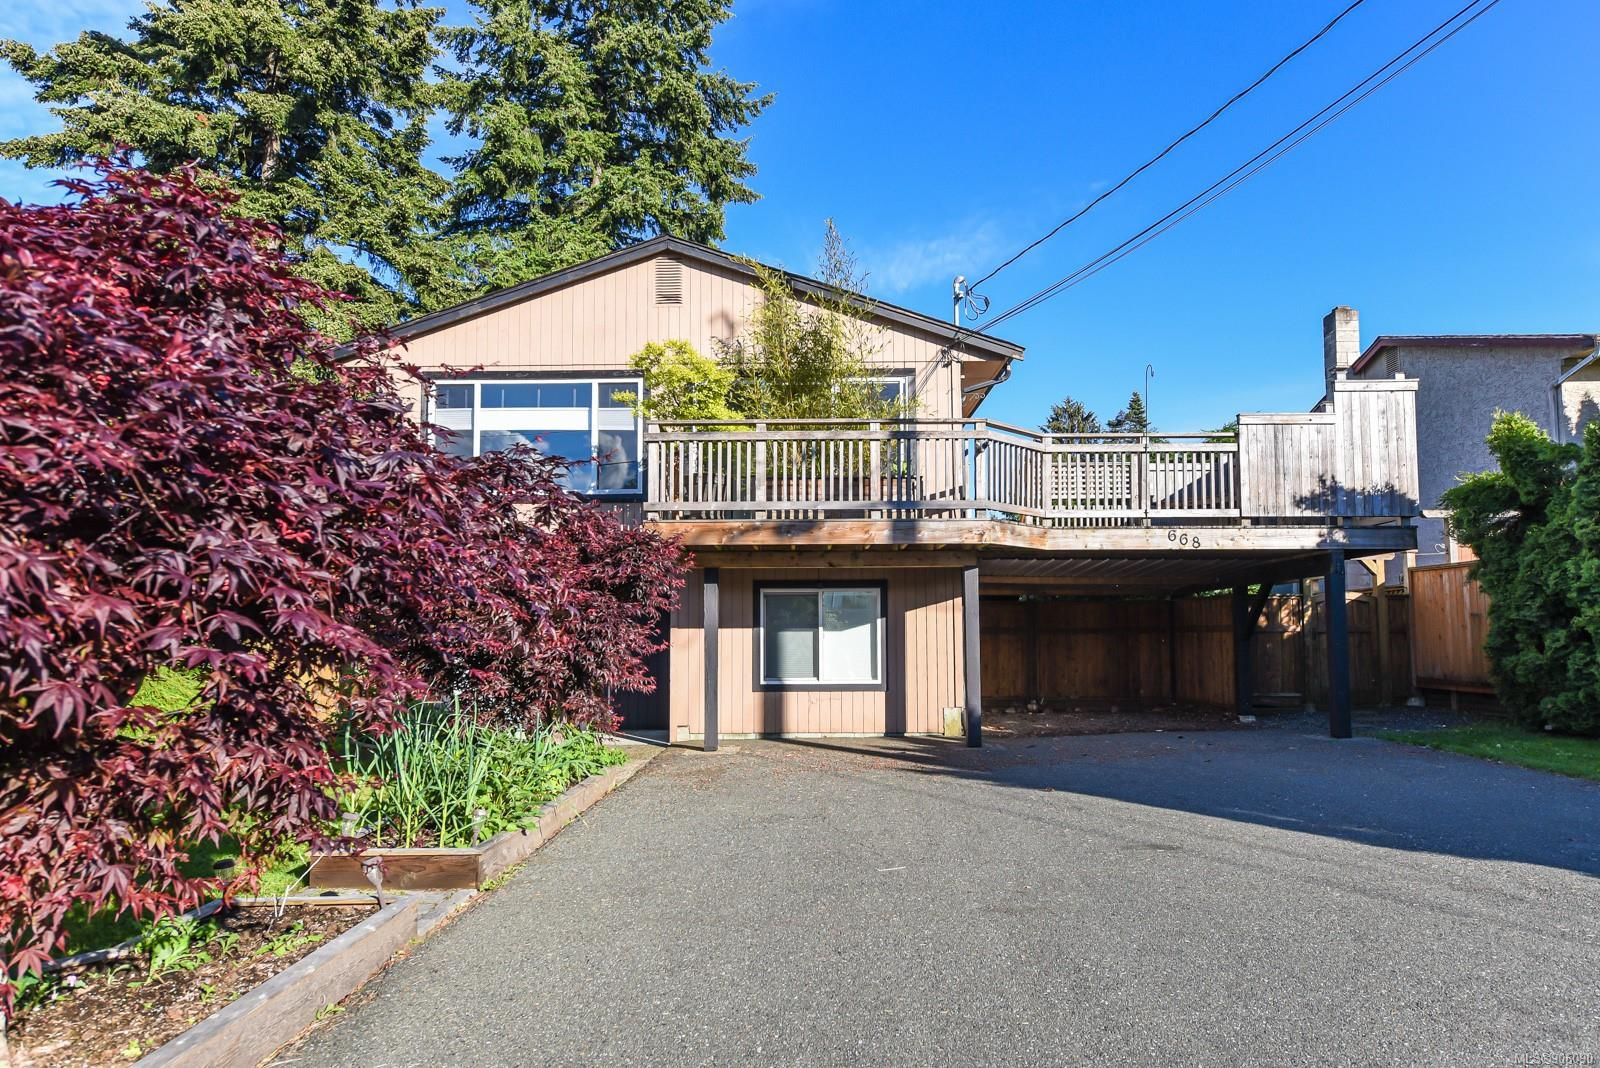 Sold! Congratulations to my buyers of 668 22nd St in Courtenay